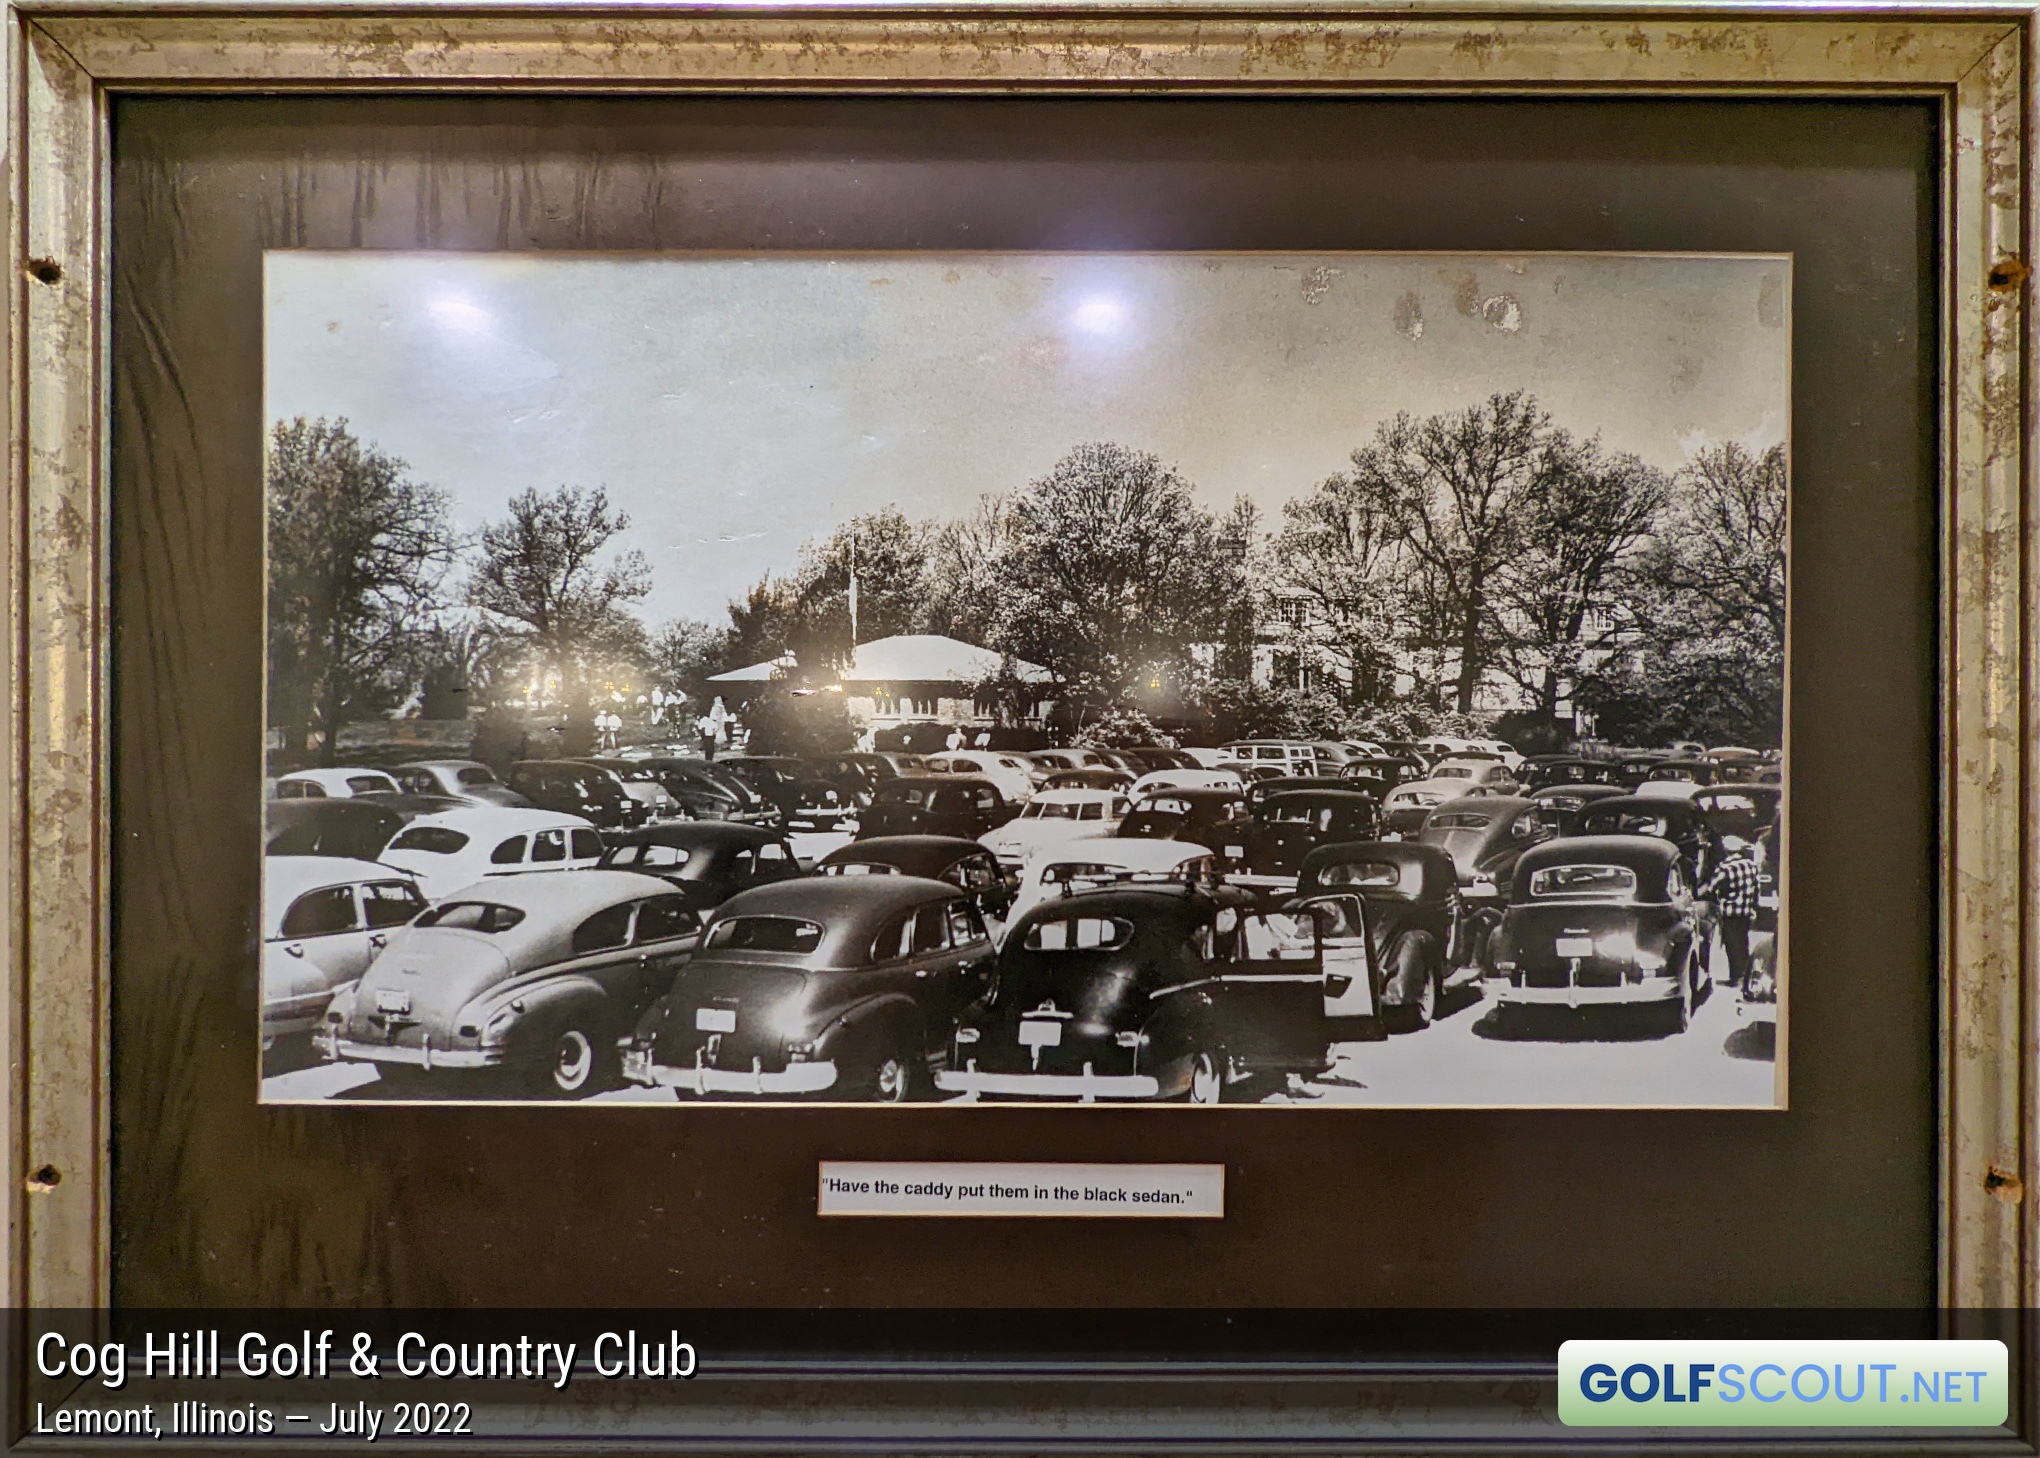 Miscellaneous photo of Cog Hill Course #1 in Lemont, Illinois. "Have the caddy put them in the black sedan."